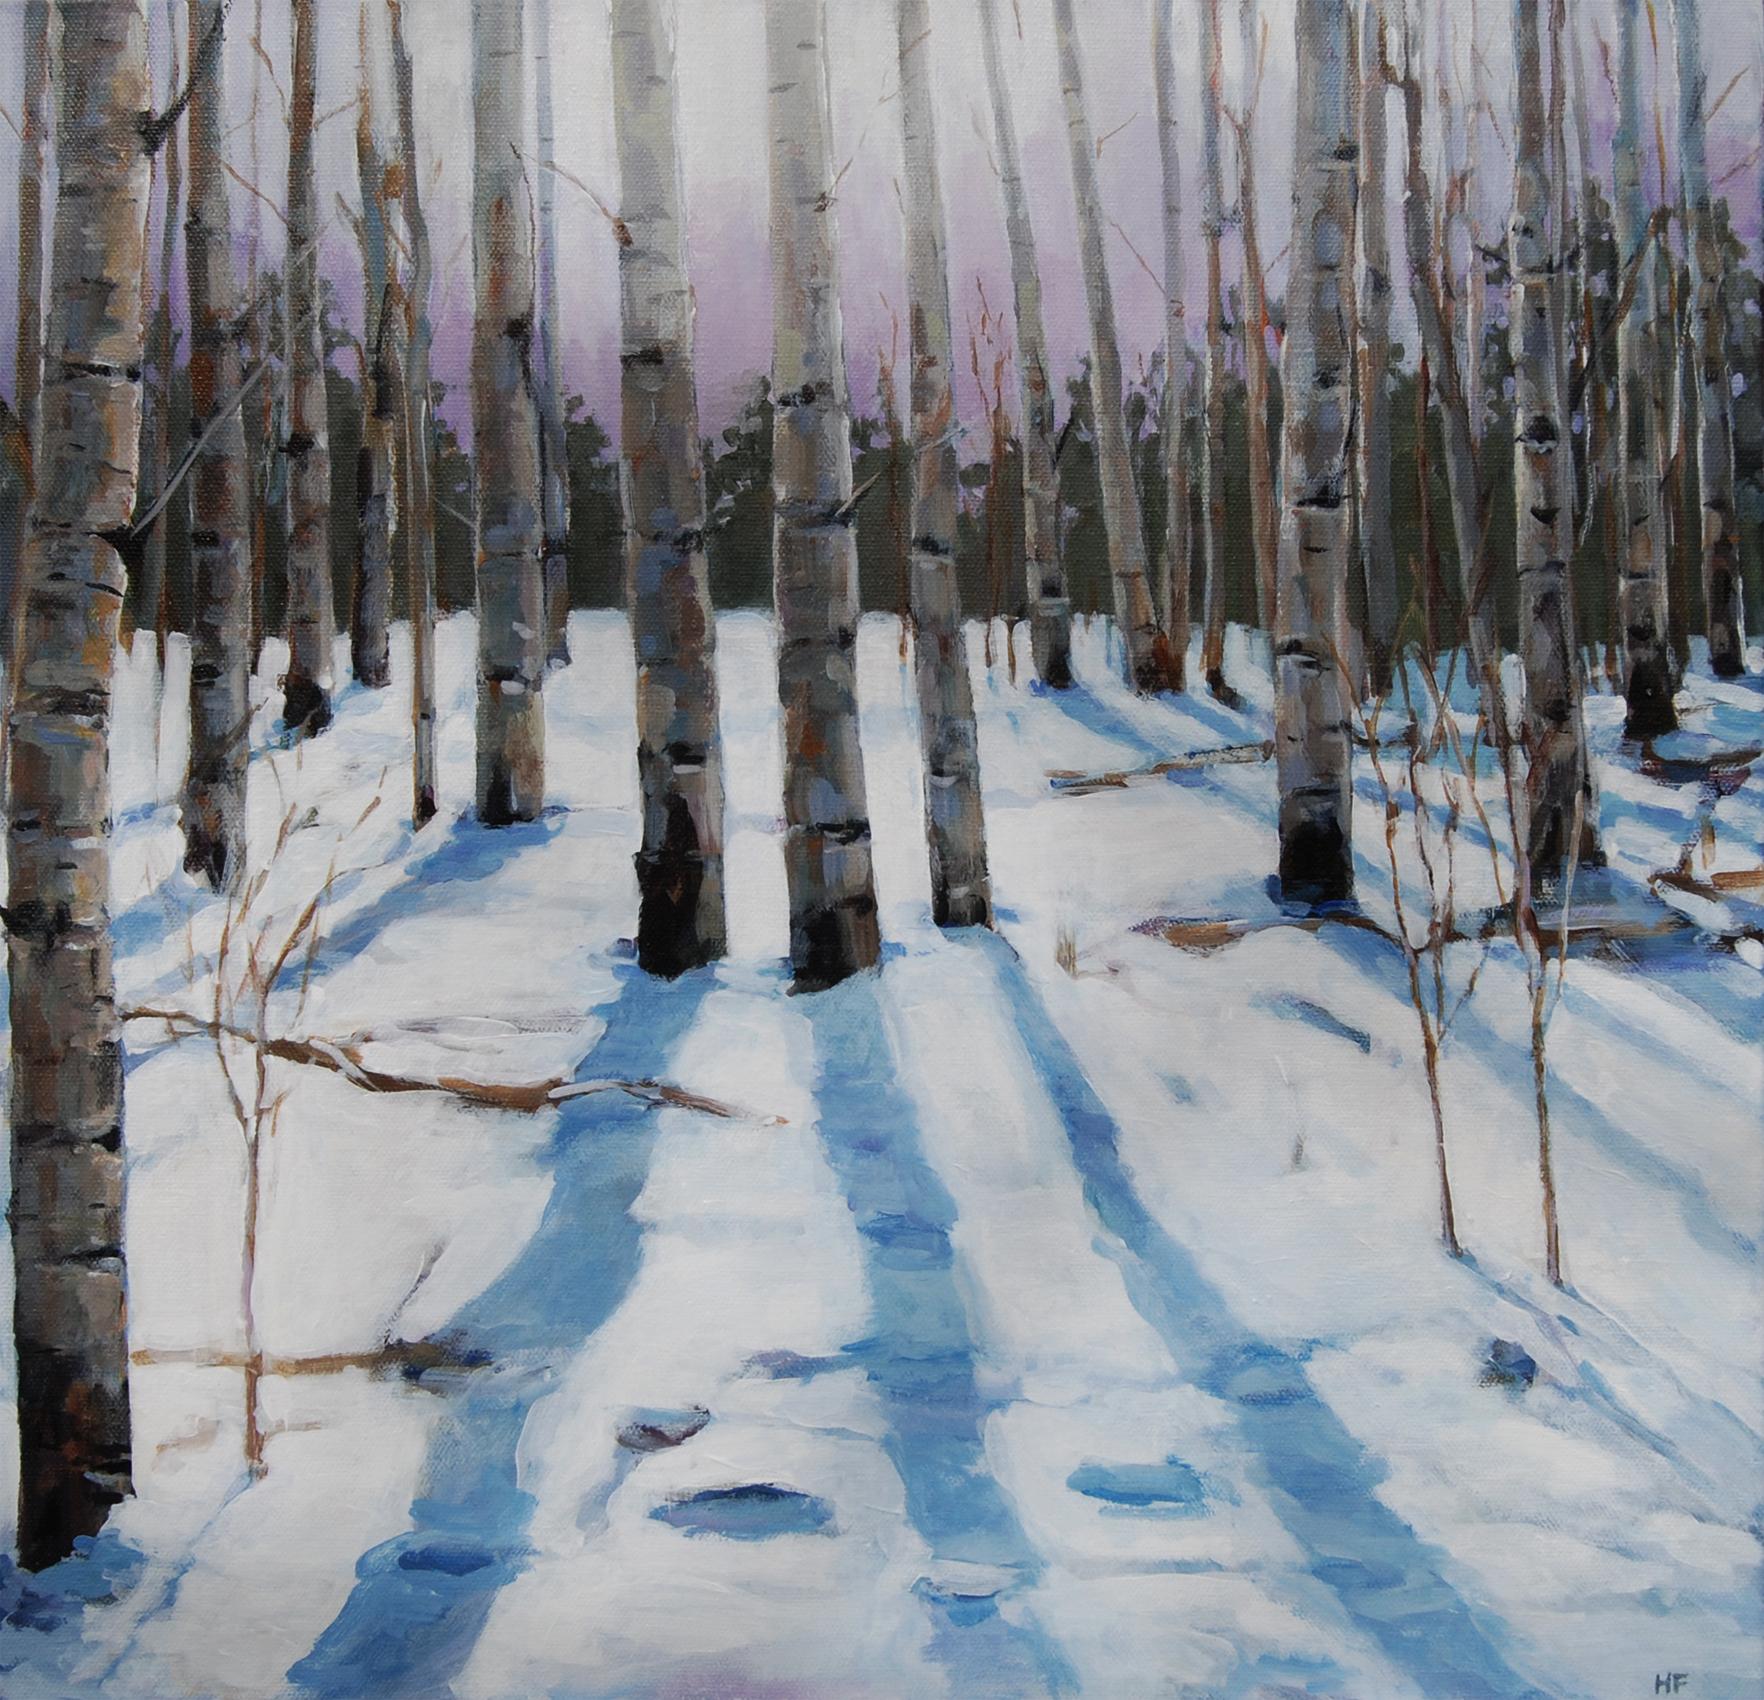 Heather Foster Landscape Painting - Storm Glow in Aspen Grove, Original Painting